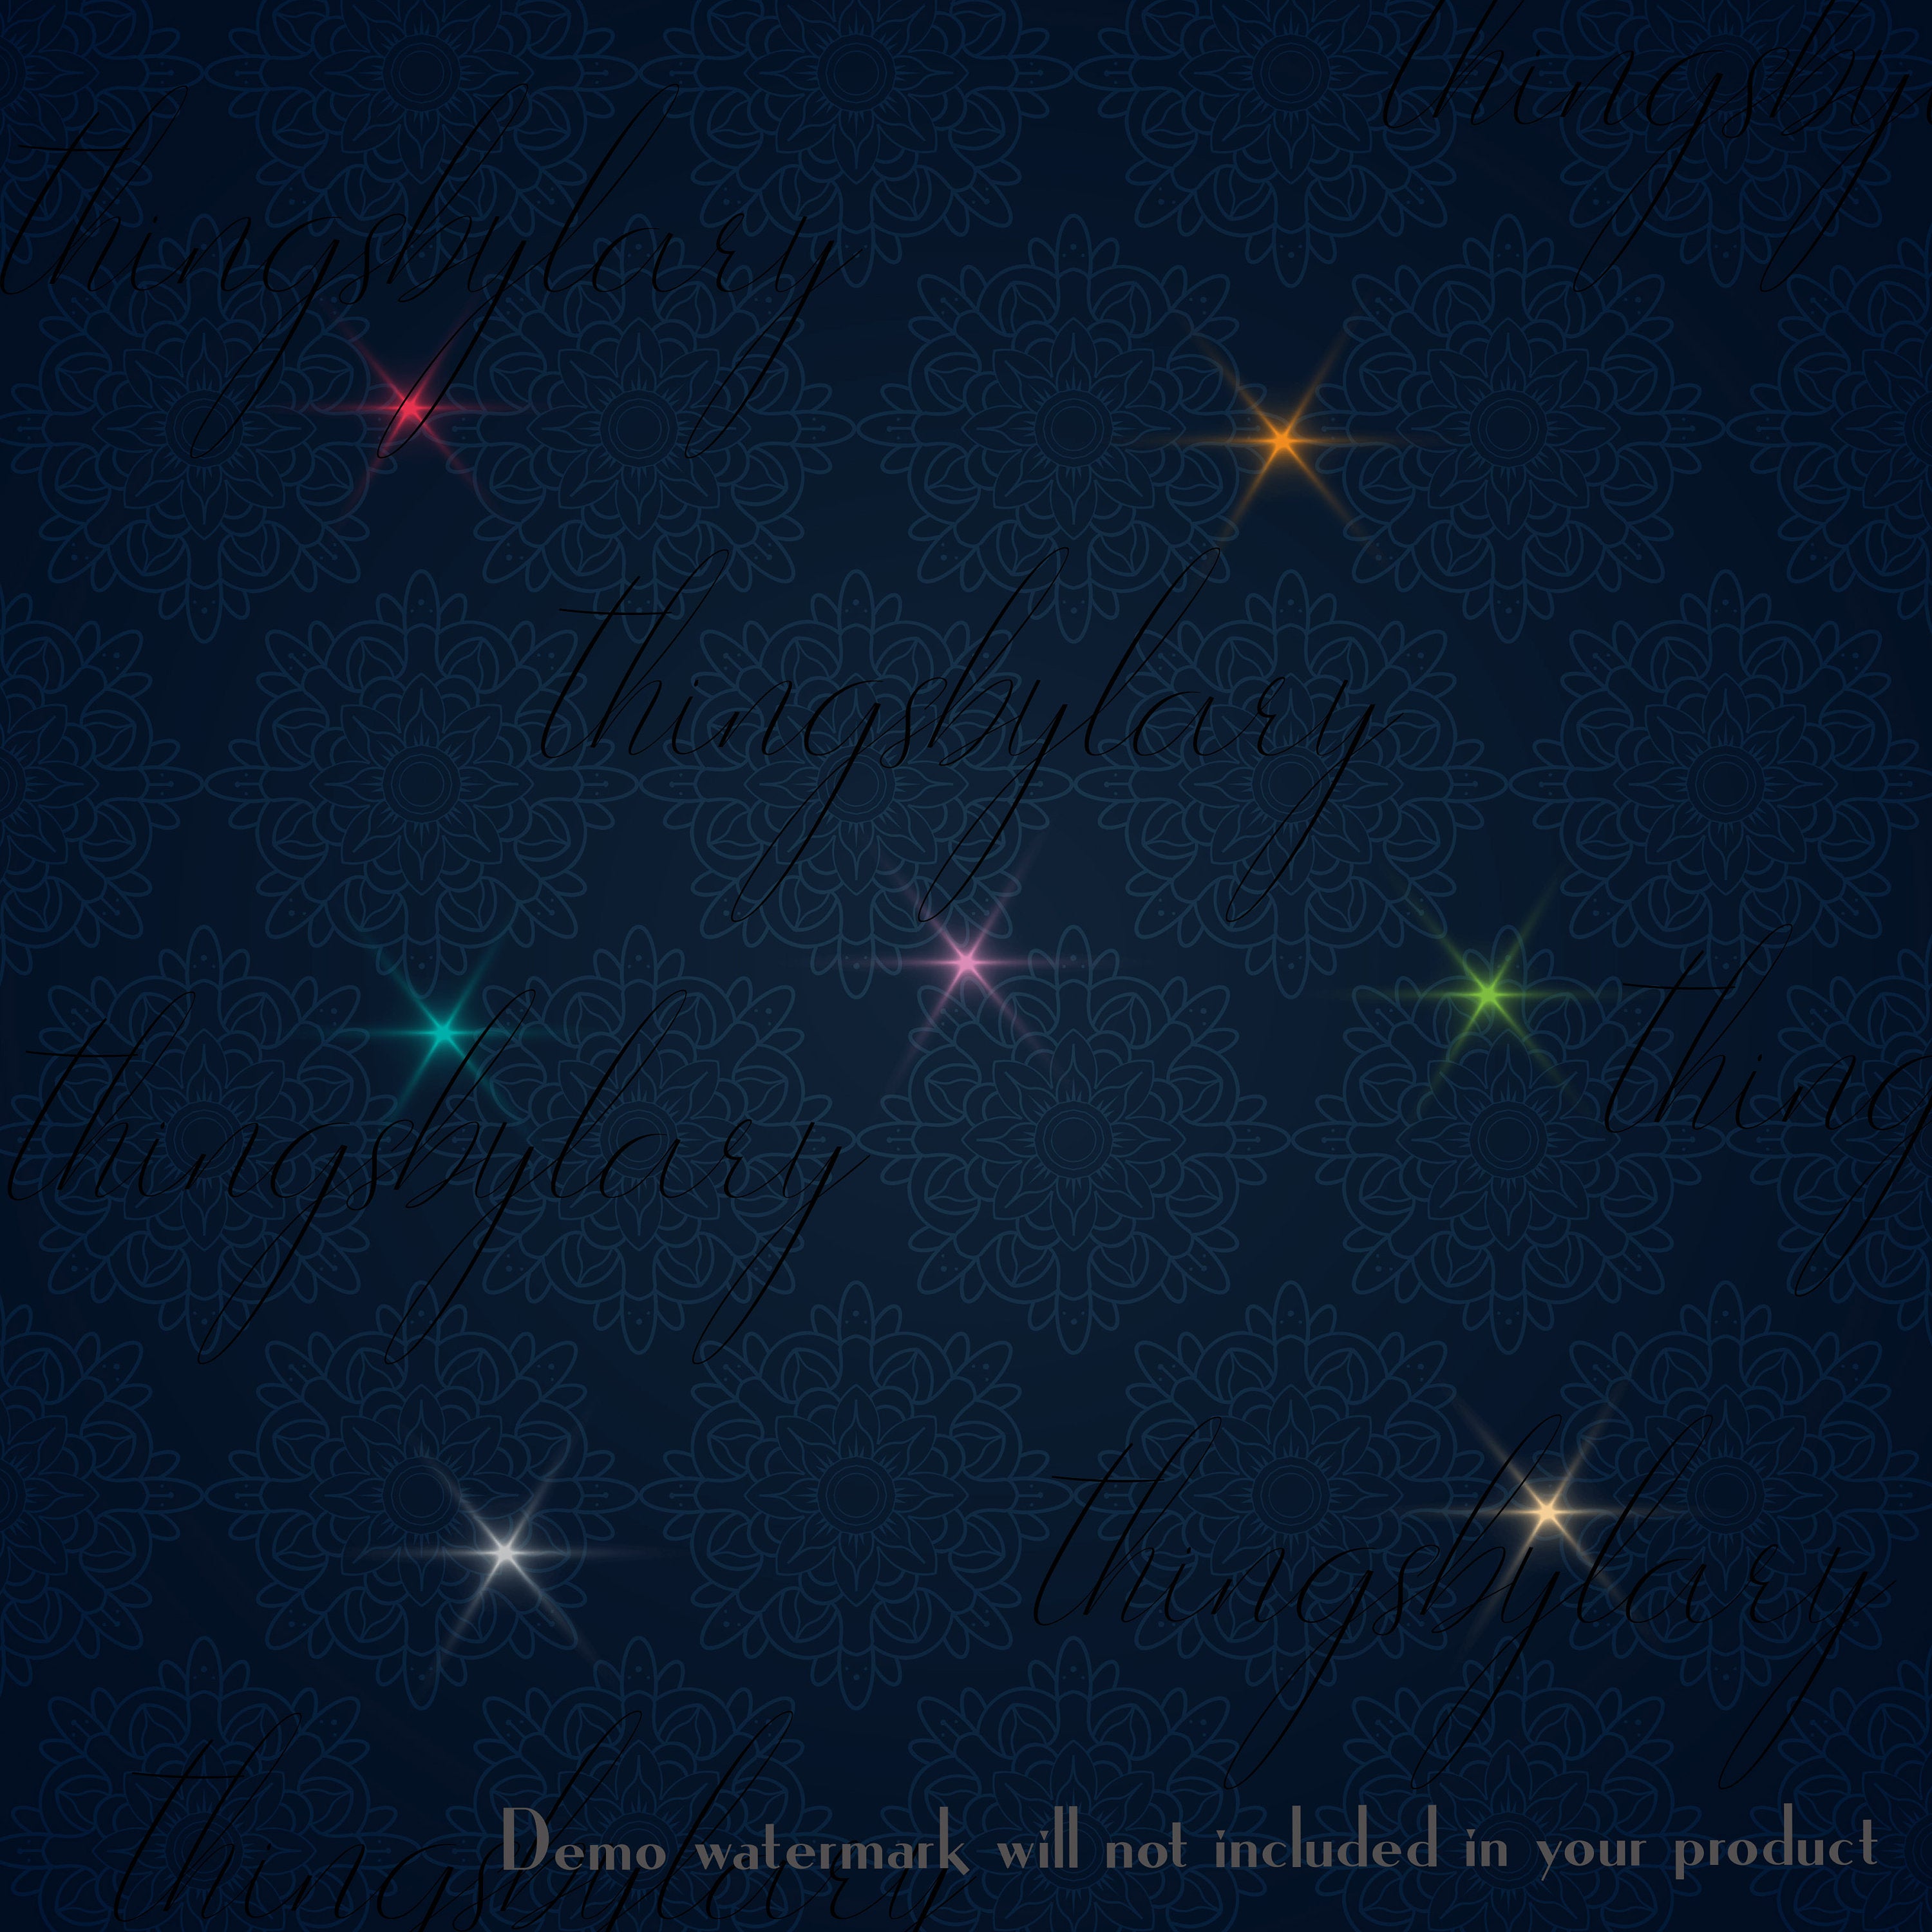 2100 Glowing Light Flare Overlay Digital Images in 100 Colors PNG Transparent 300 Dpi Instant Download Commercial Use Card bling sparkle